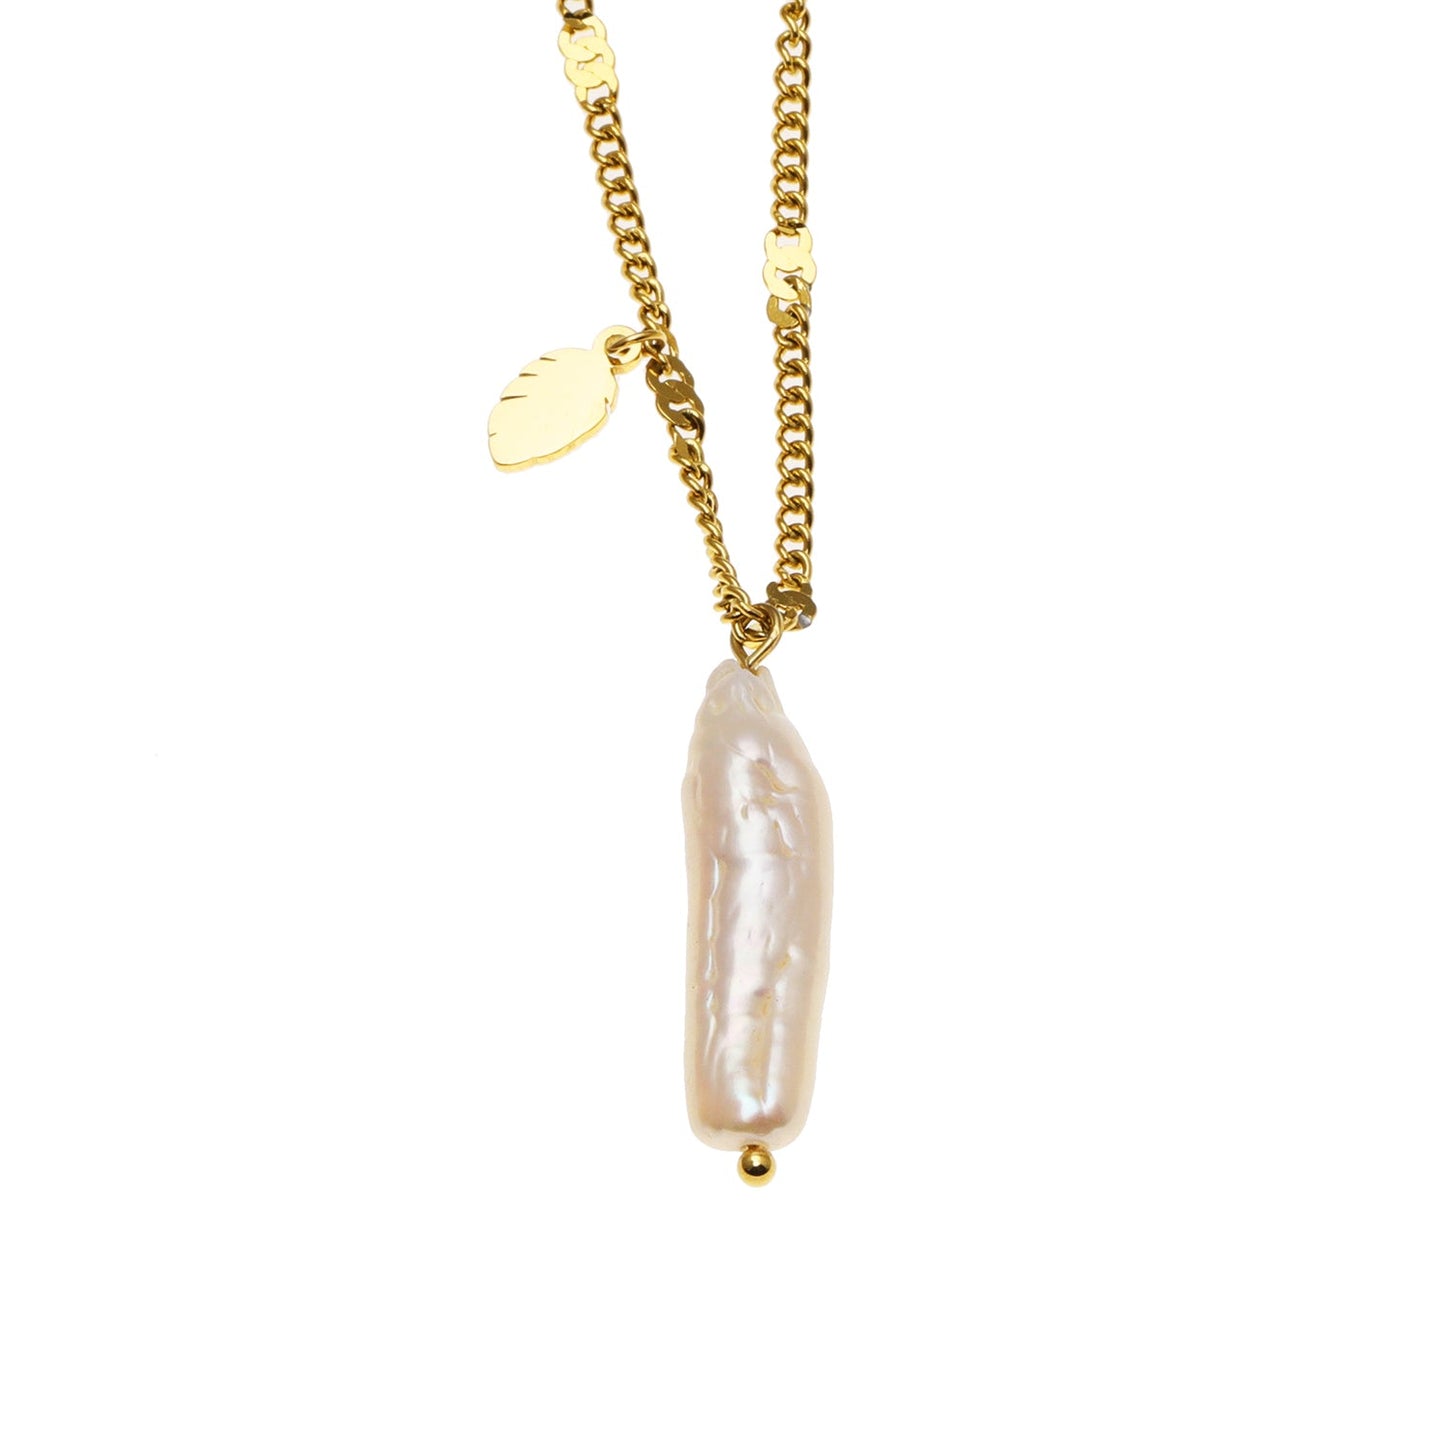 ANNECY: Nature Inspired Chic Chain Necklace Enhanced with Baroque Pearl and Leaf Charm